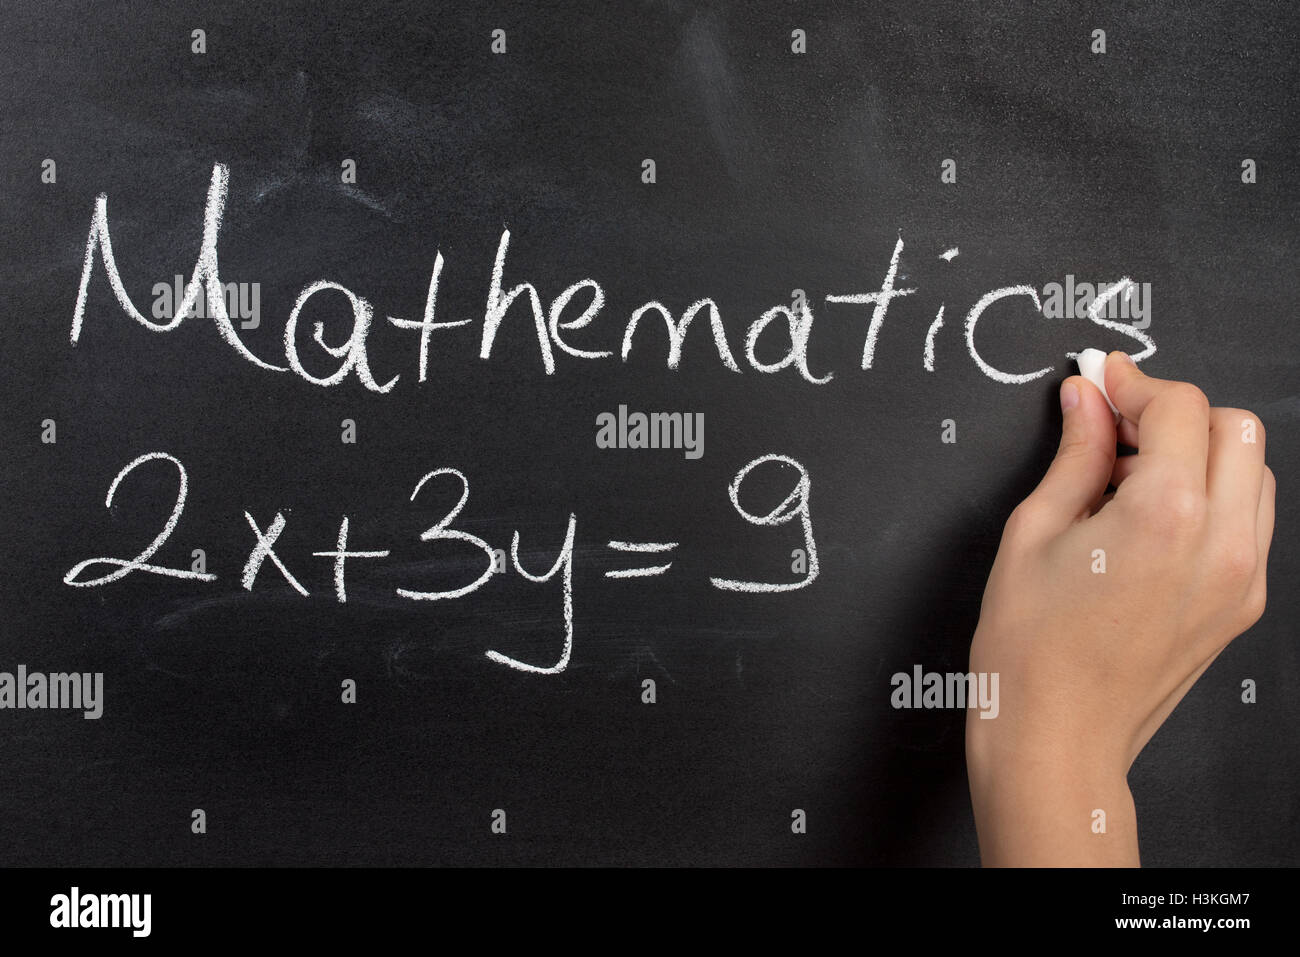 Closeup of hand writing complicated math equation on black board. Stock Photo